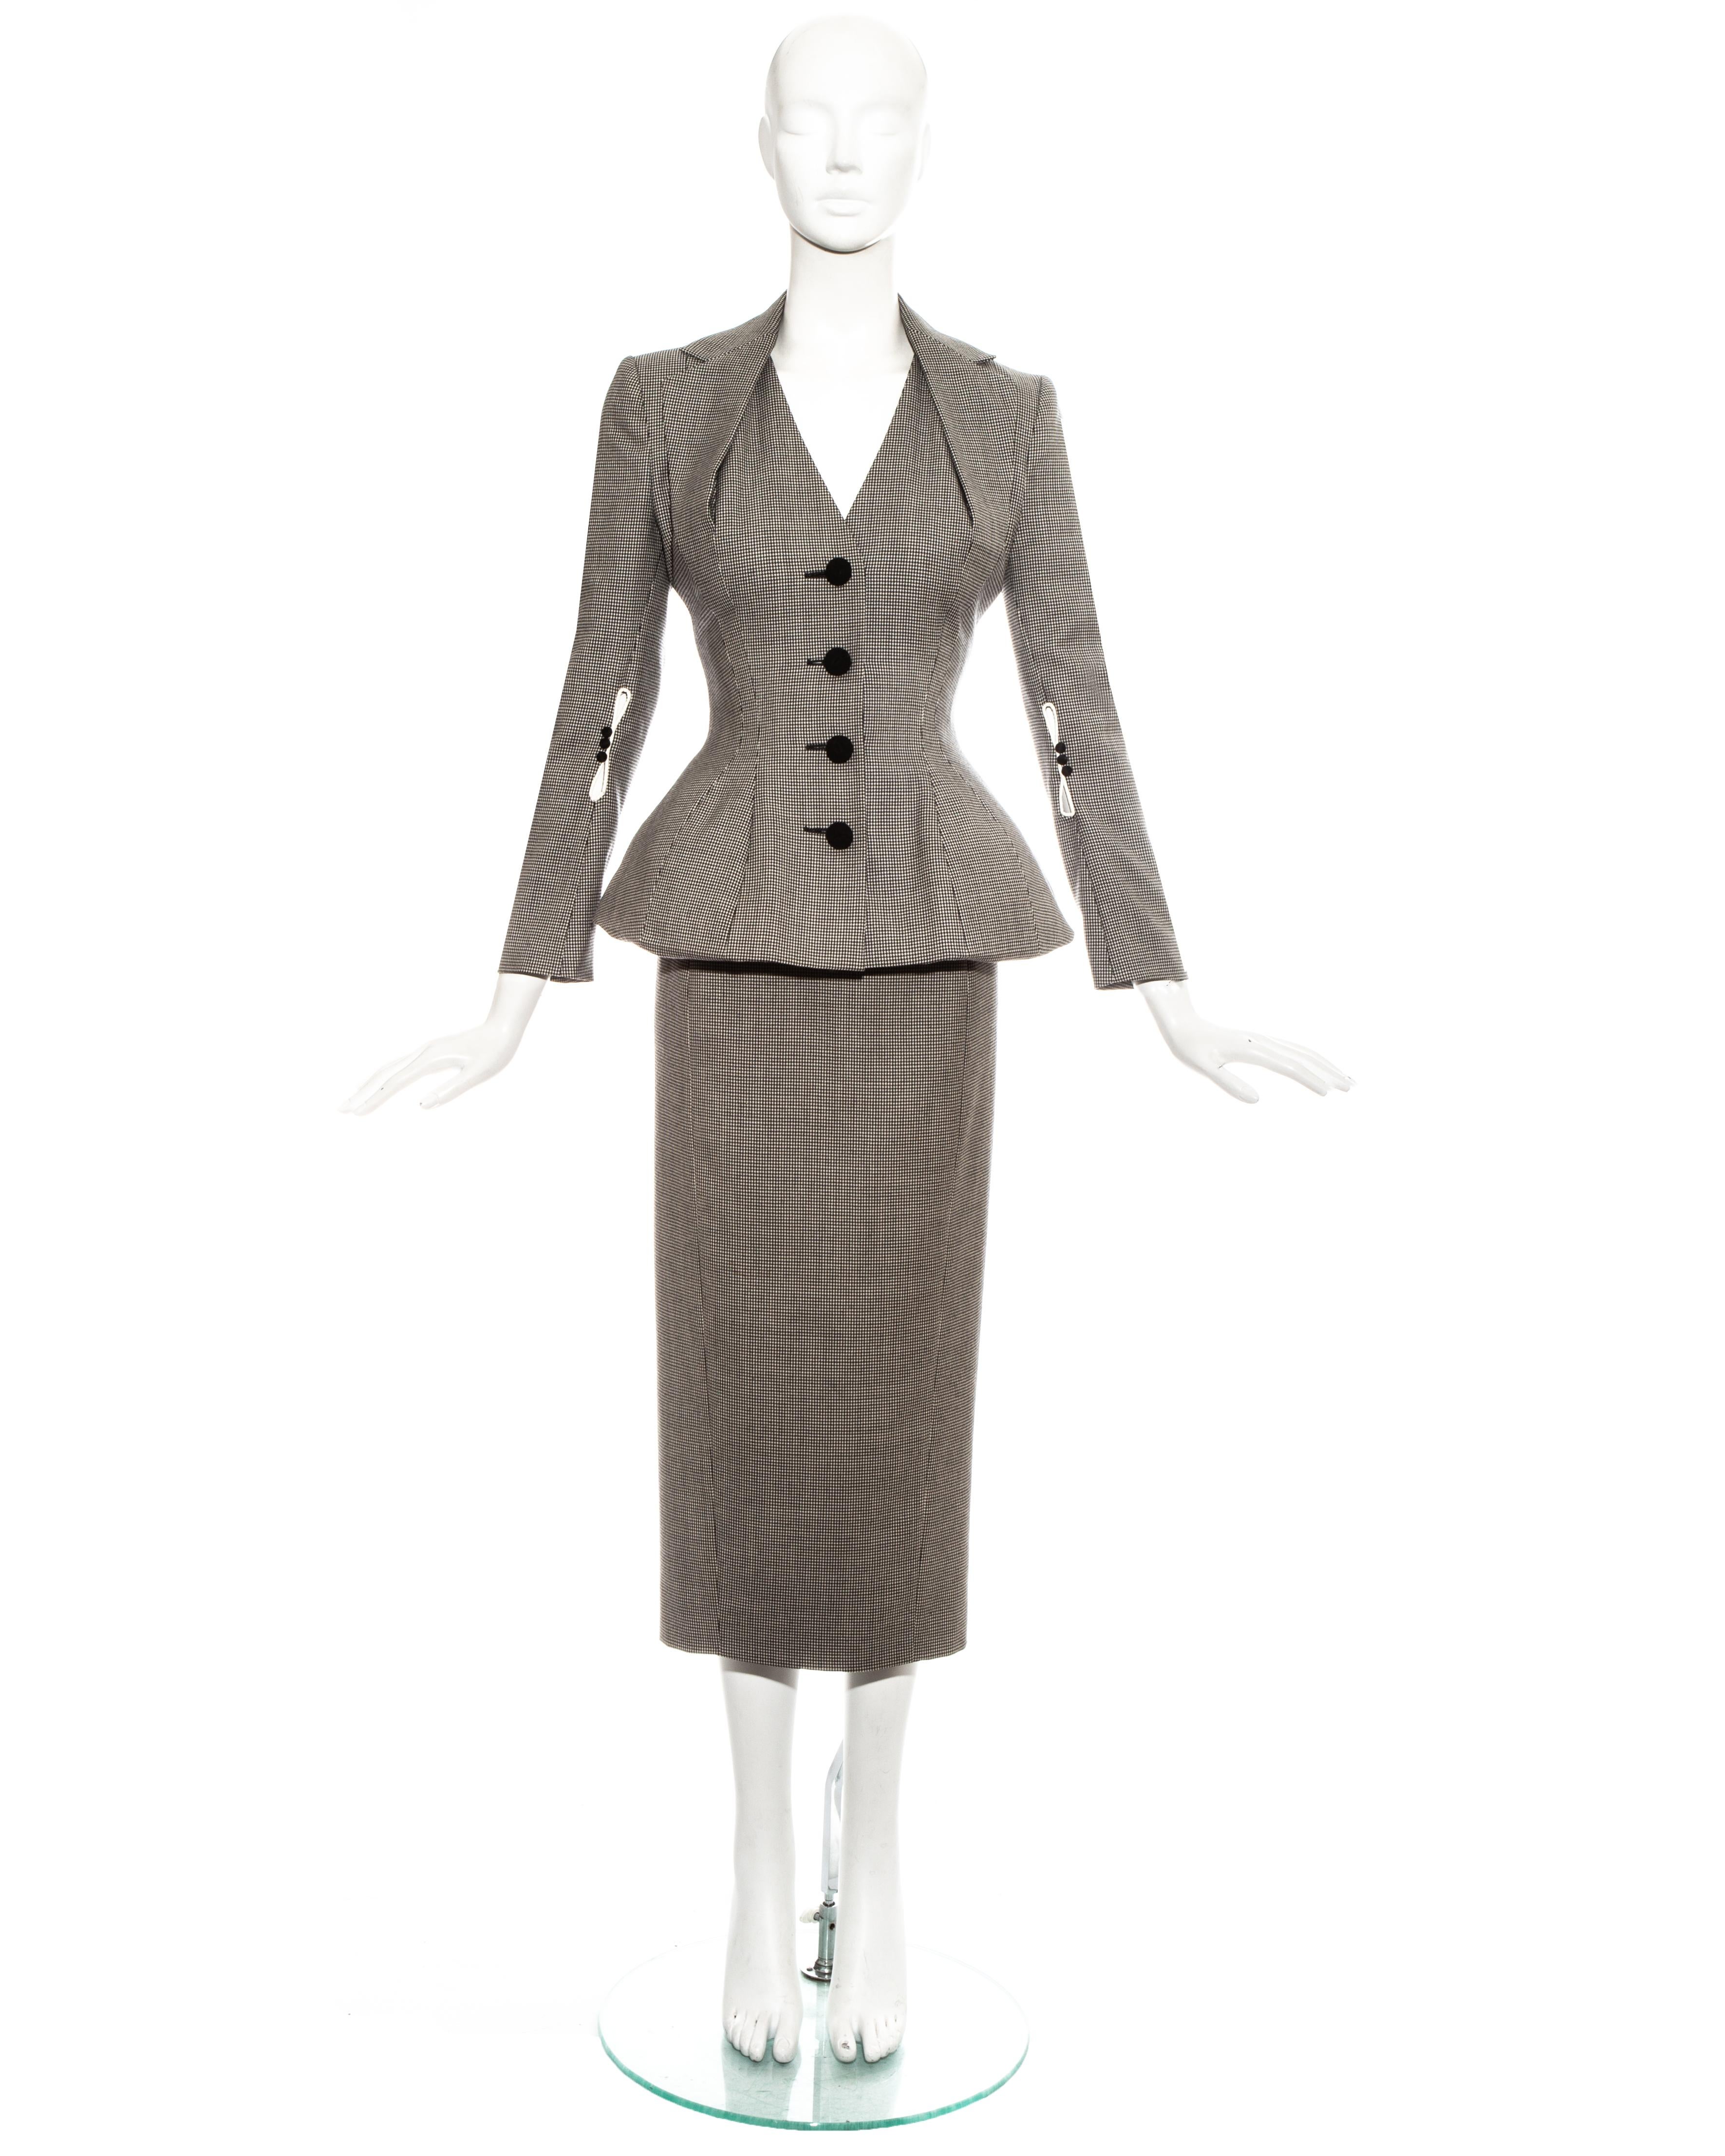 John Galliano; hound's tooth check wool skirt suit. Jacket with padded shoulders, hips and halter-neck style lapel, cord covered buttons. Matching high-waisted pencil skirt. 

Spring-Summer 1995